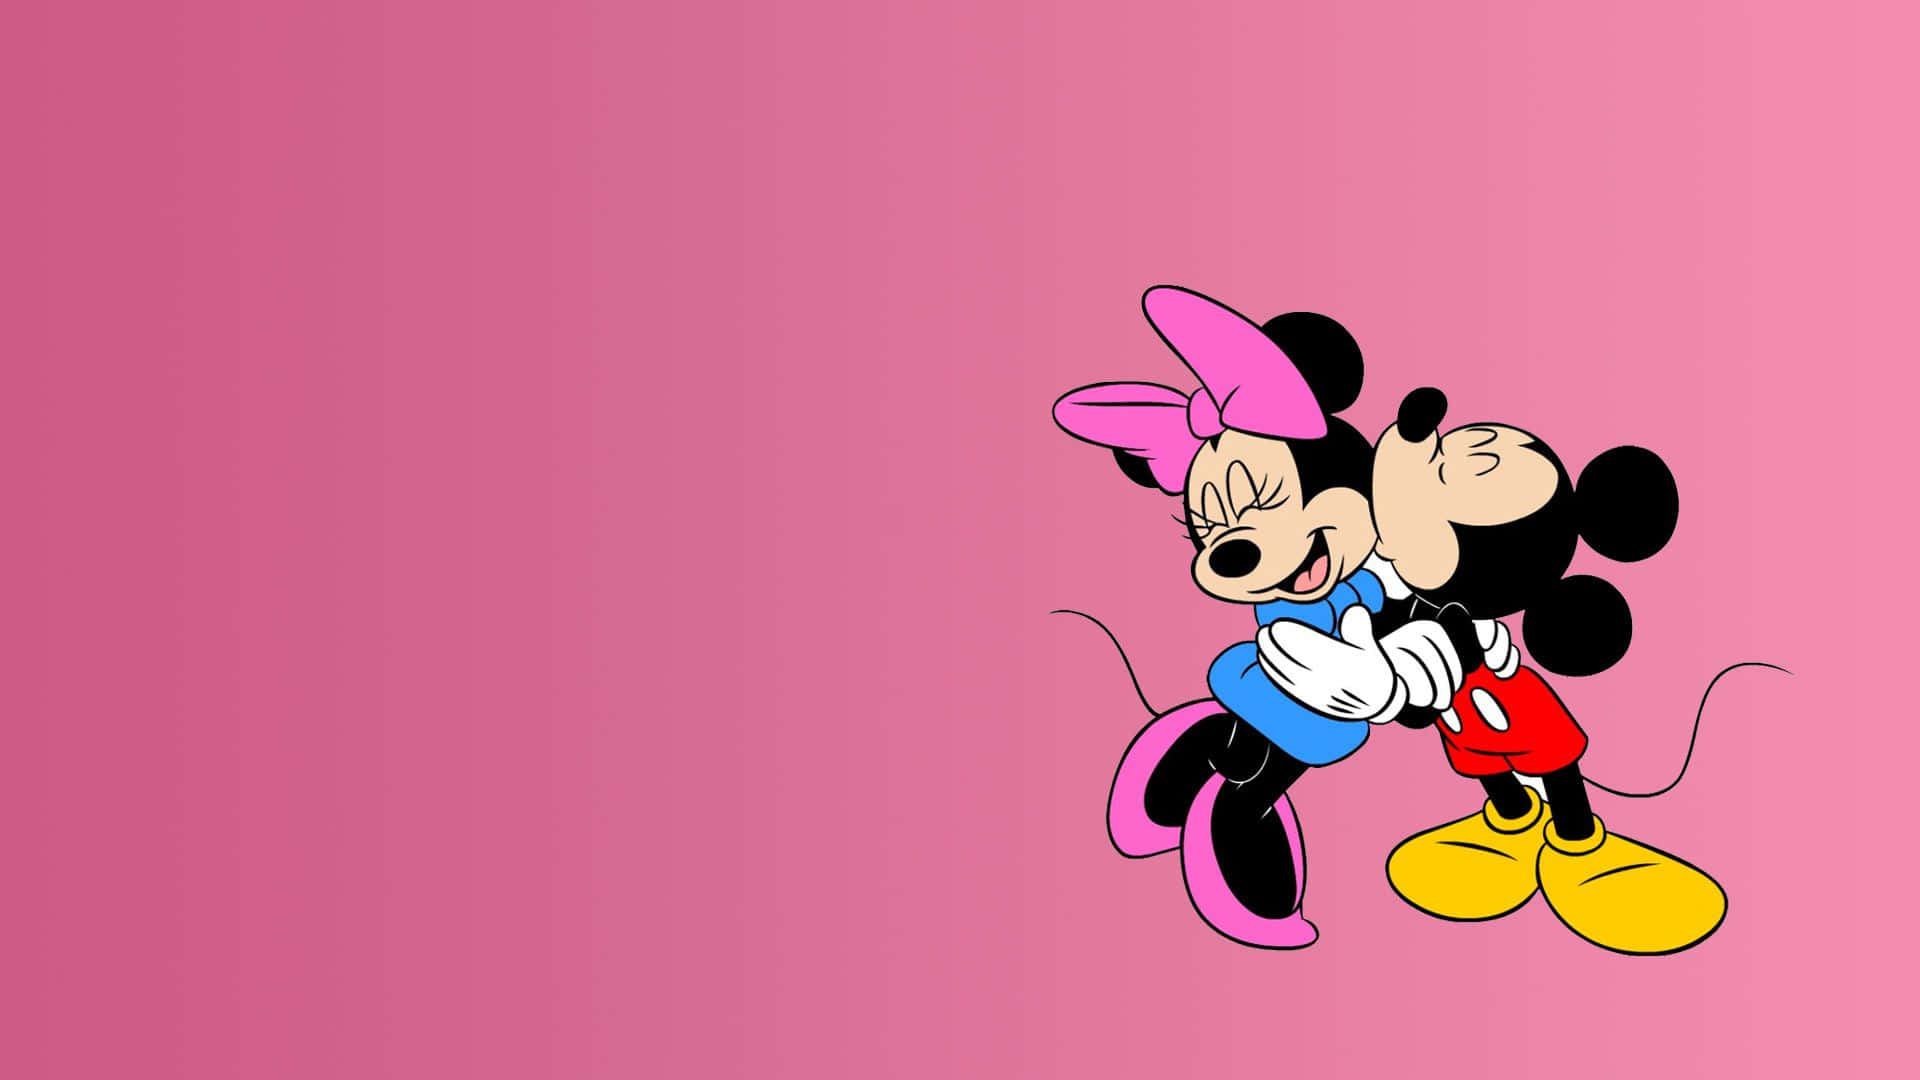 Cute As A Button, Minnie Mouse Beaming In Pink Wallpaper